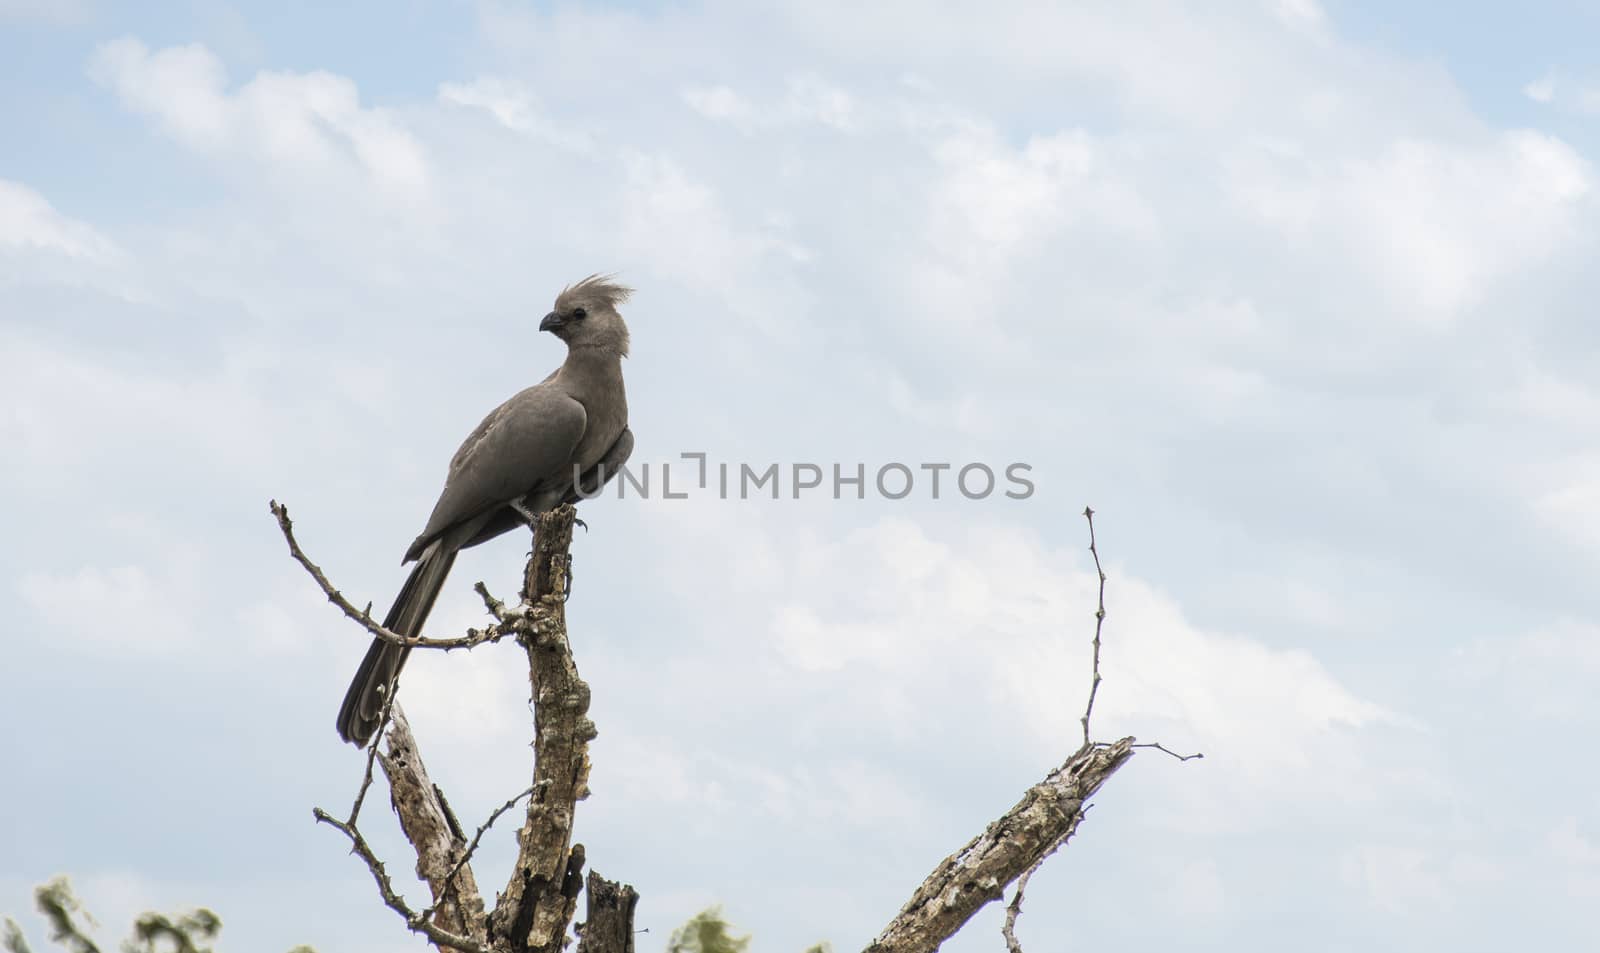 Grey go-away bird in Kruger national park, South Africa , Specie C orythaixoides concolor family of Musophagidae